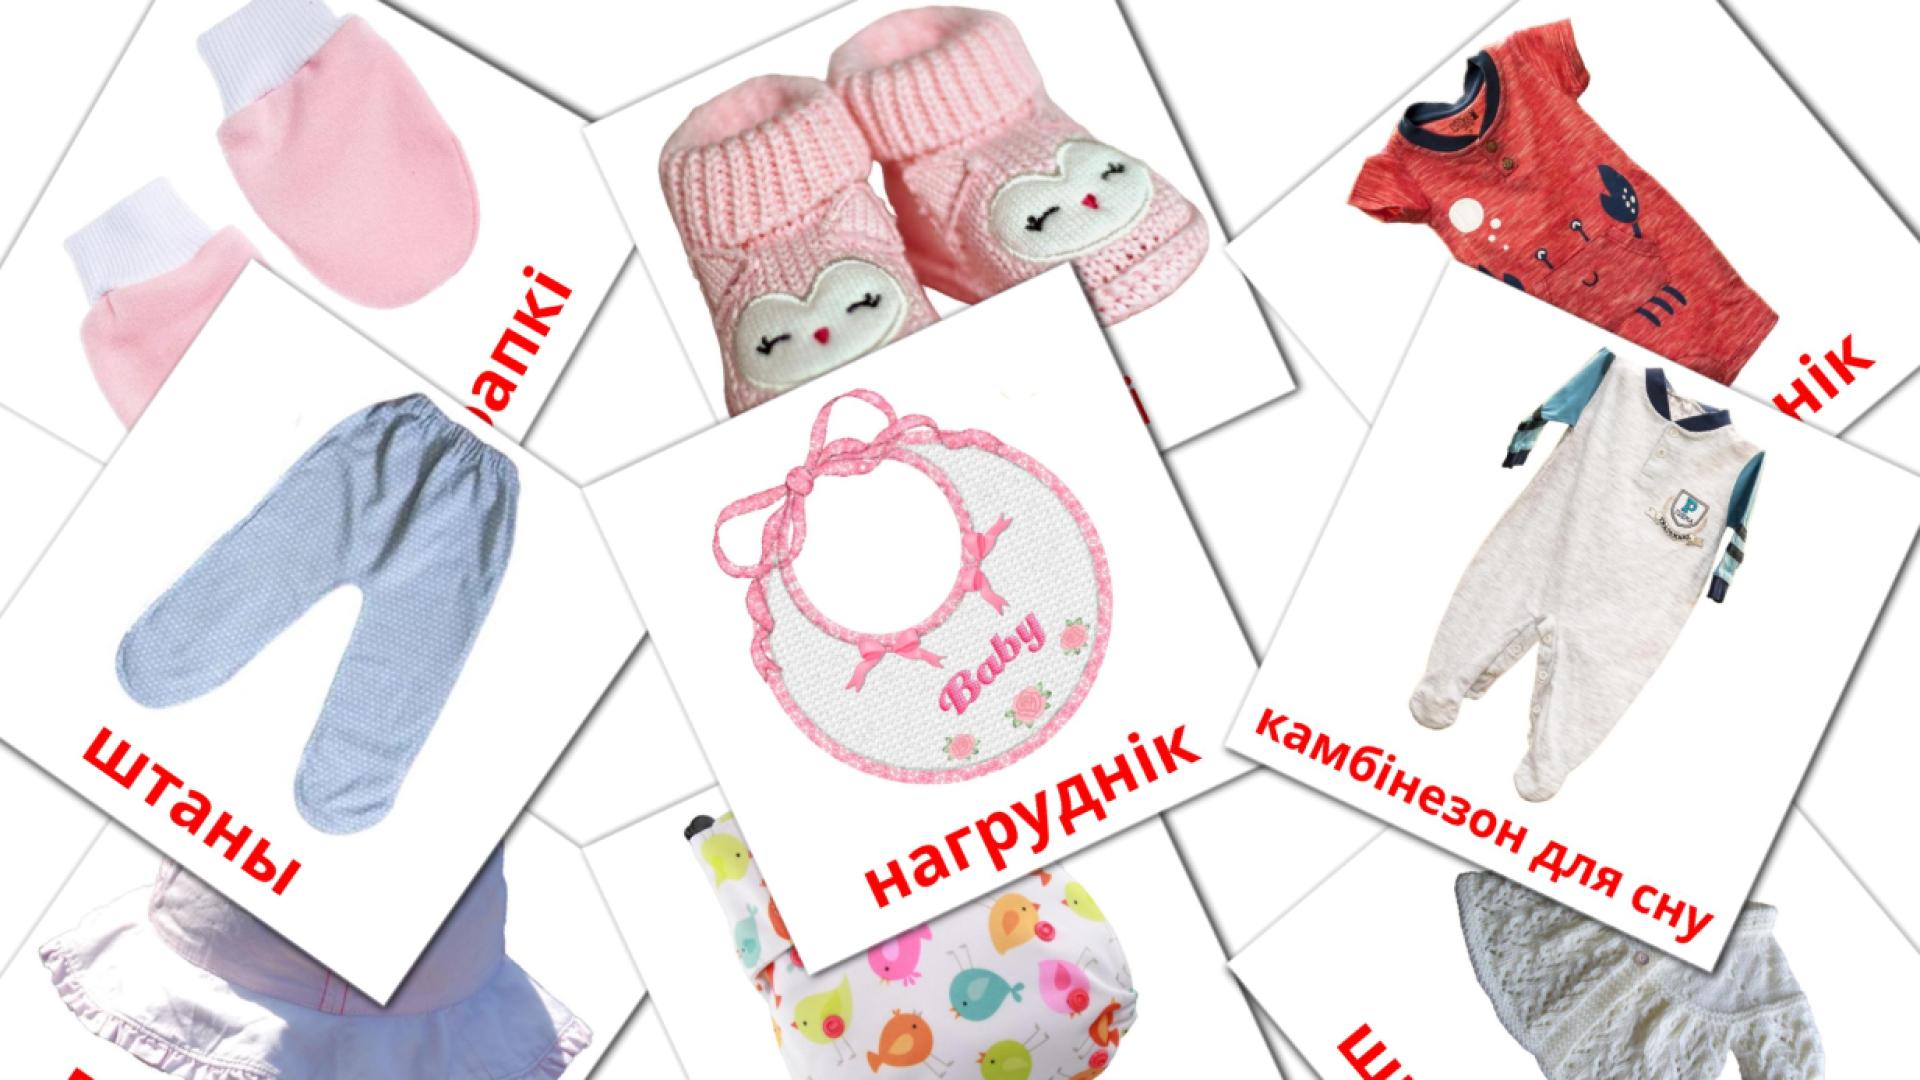 Baby clothes - belarusian vocabulary cards